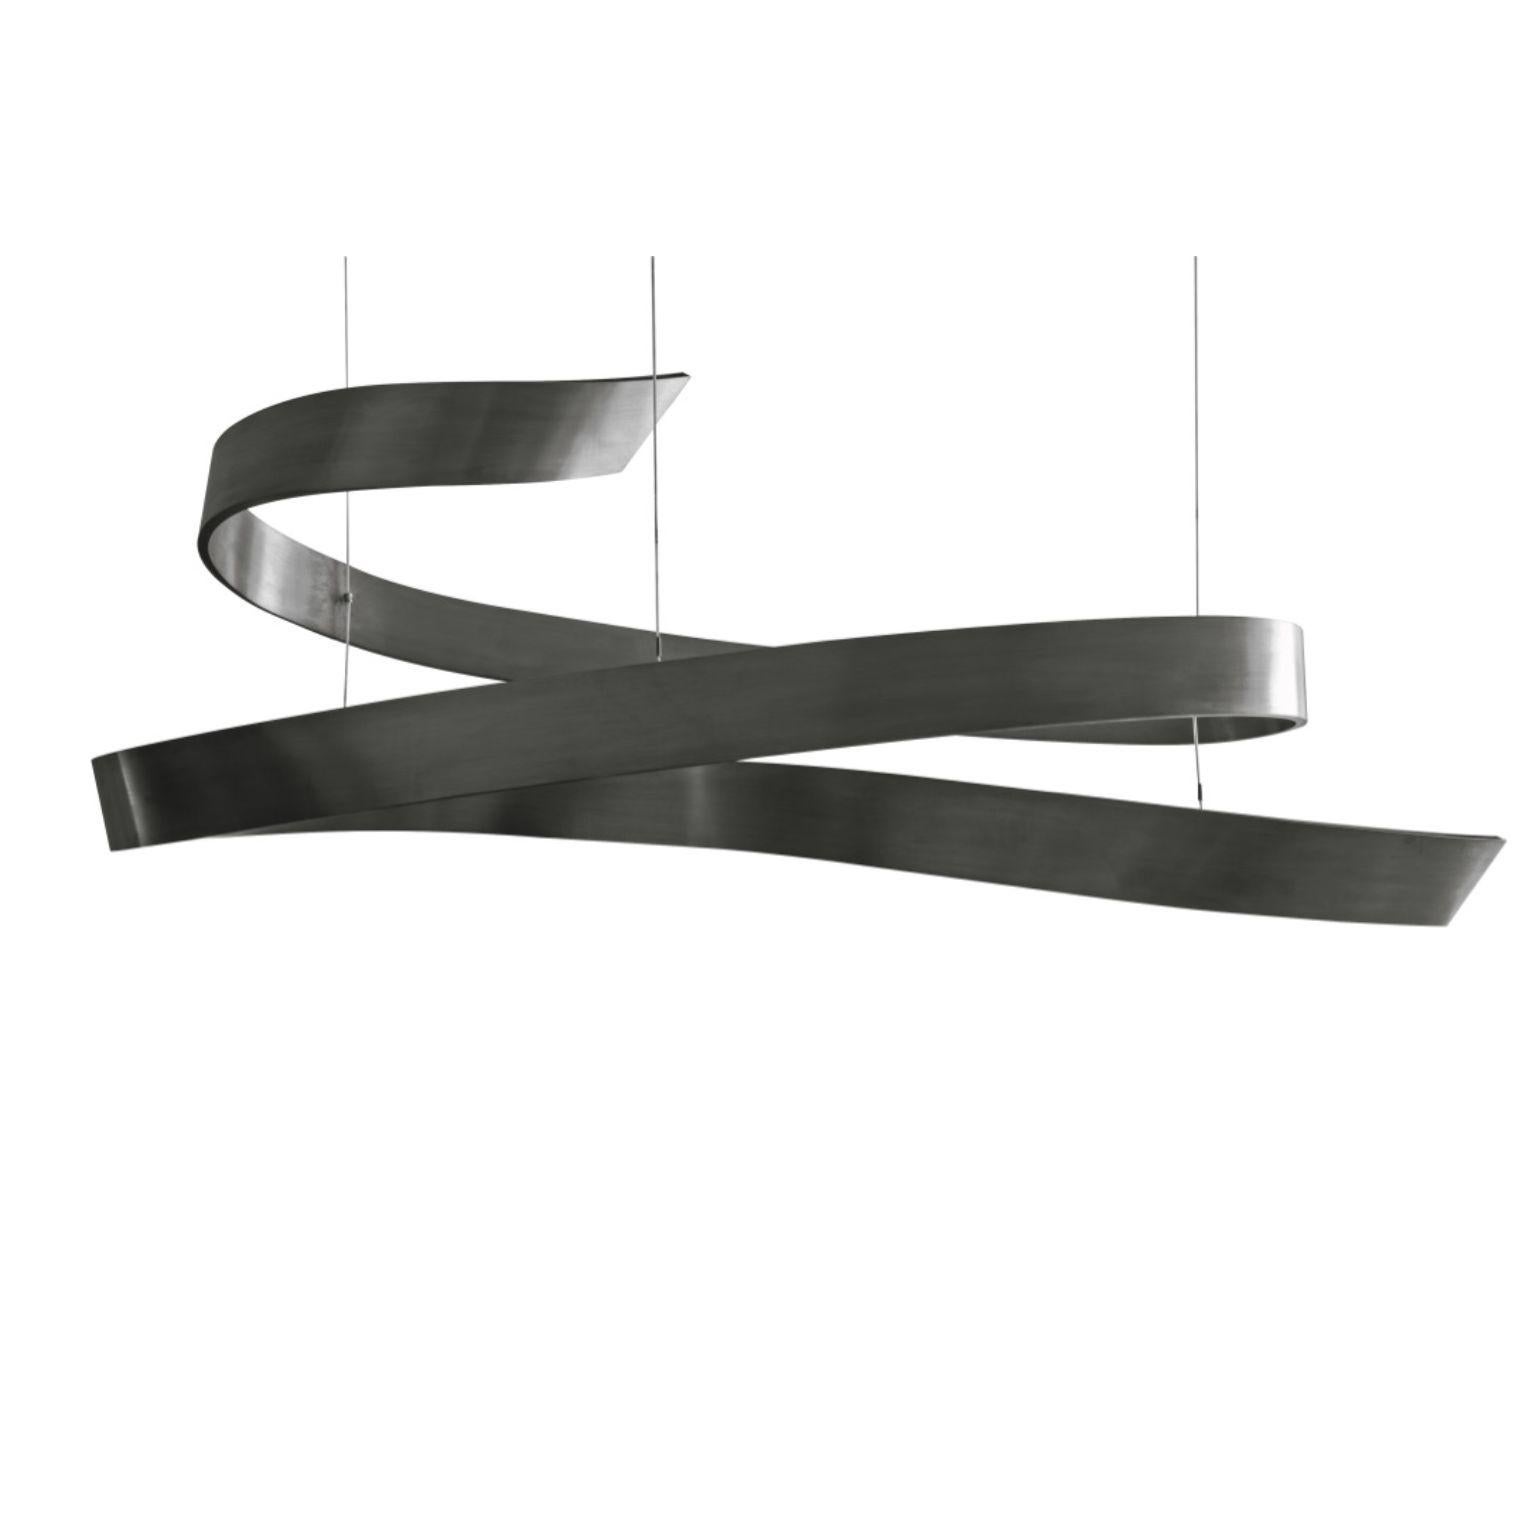 Parques Ribbon Lighting Fixture by Emilie Lemardeley
Dimensions: D140 x W55 x H55 cm
Materials: metal with black patina.
Weight: 8 kg
The patina can be bronze, gold (yellow or white gold leaves), silver.

This lighting ranges refers to the